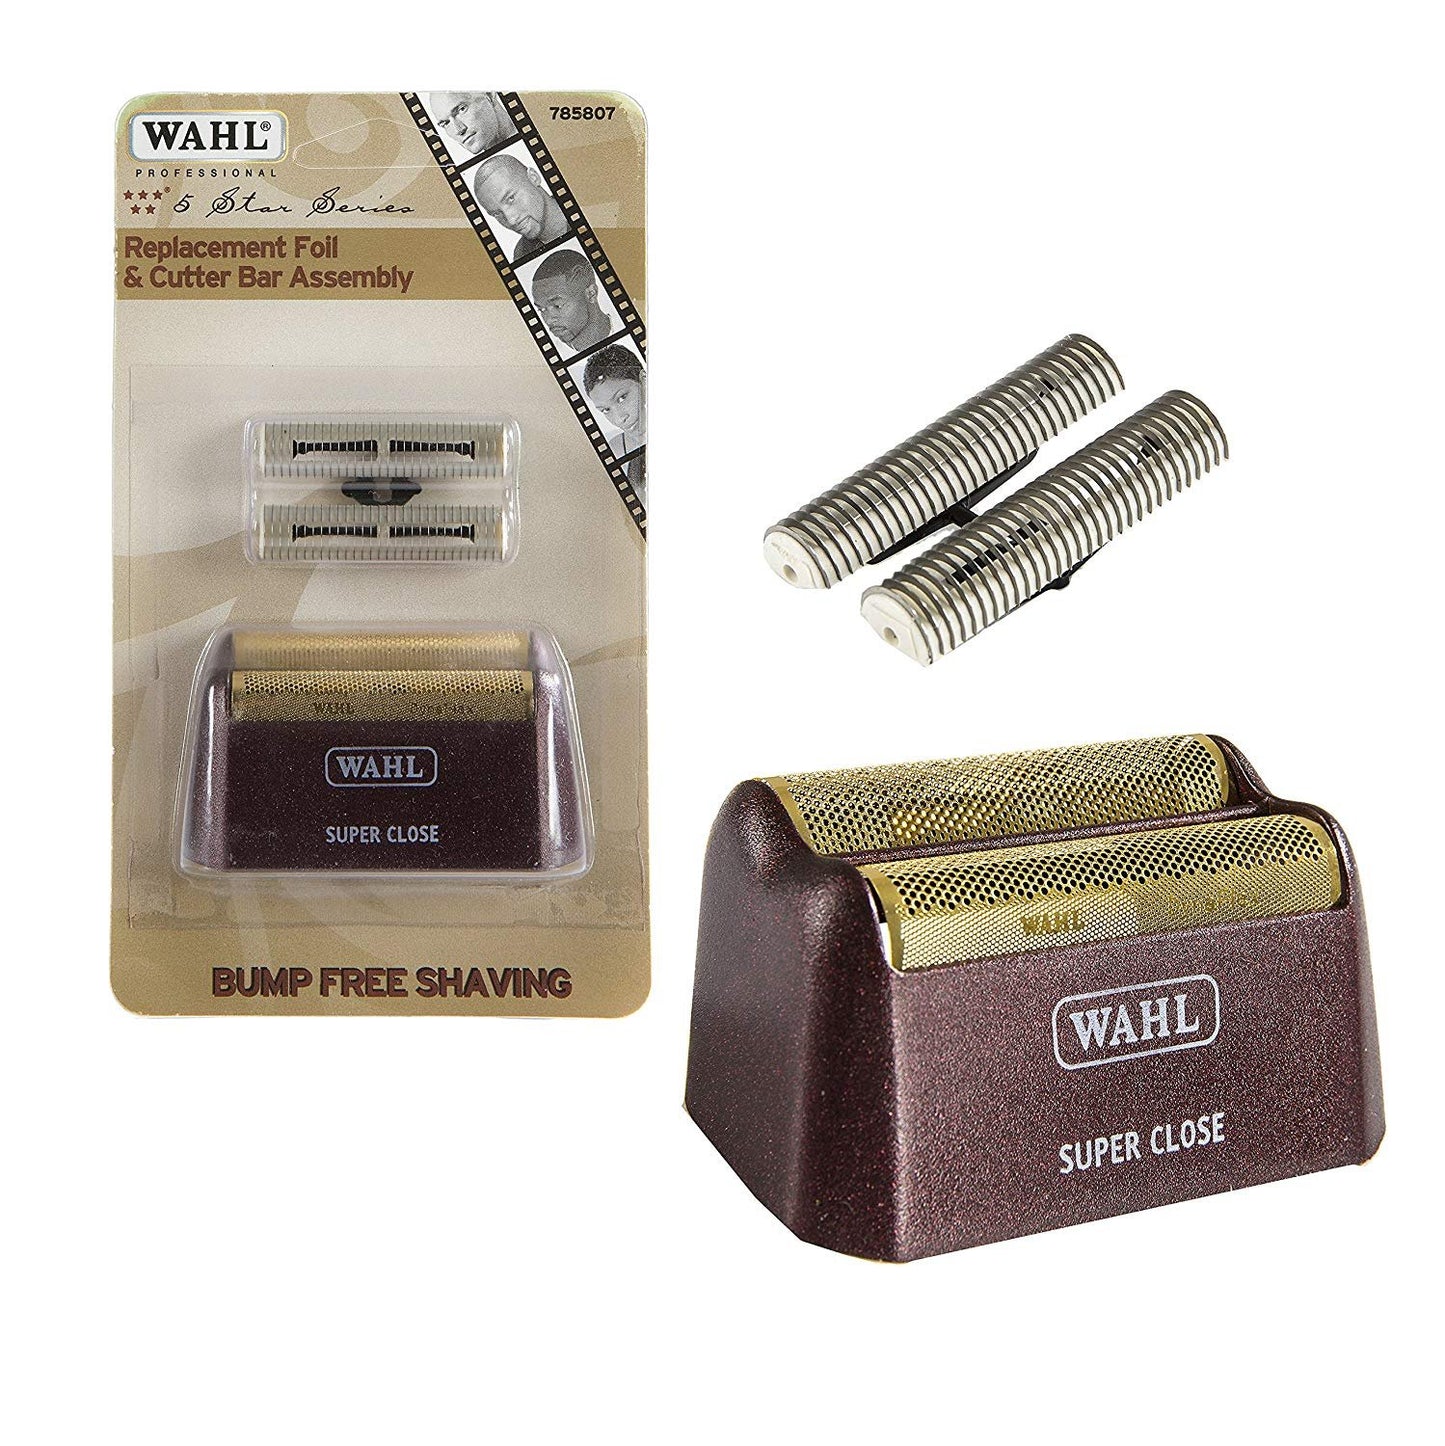 Wahl Shaver Replacement Foil and Cutter 7031-100 | Wahl